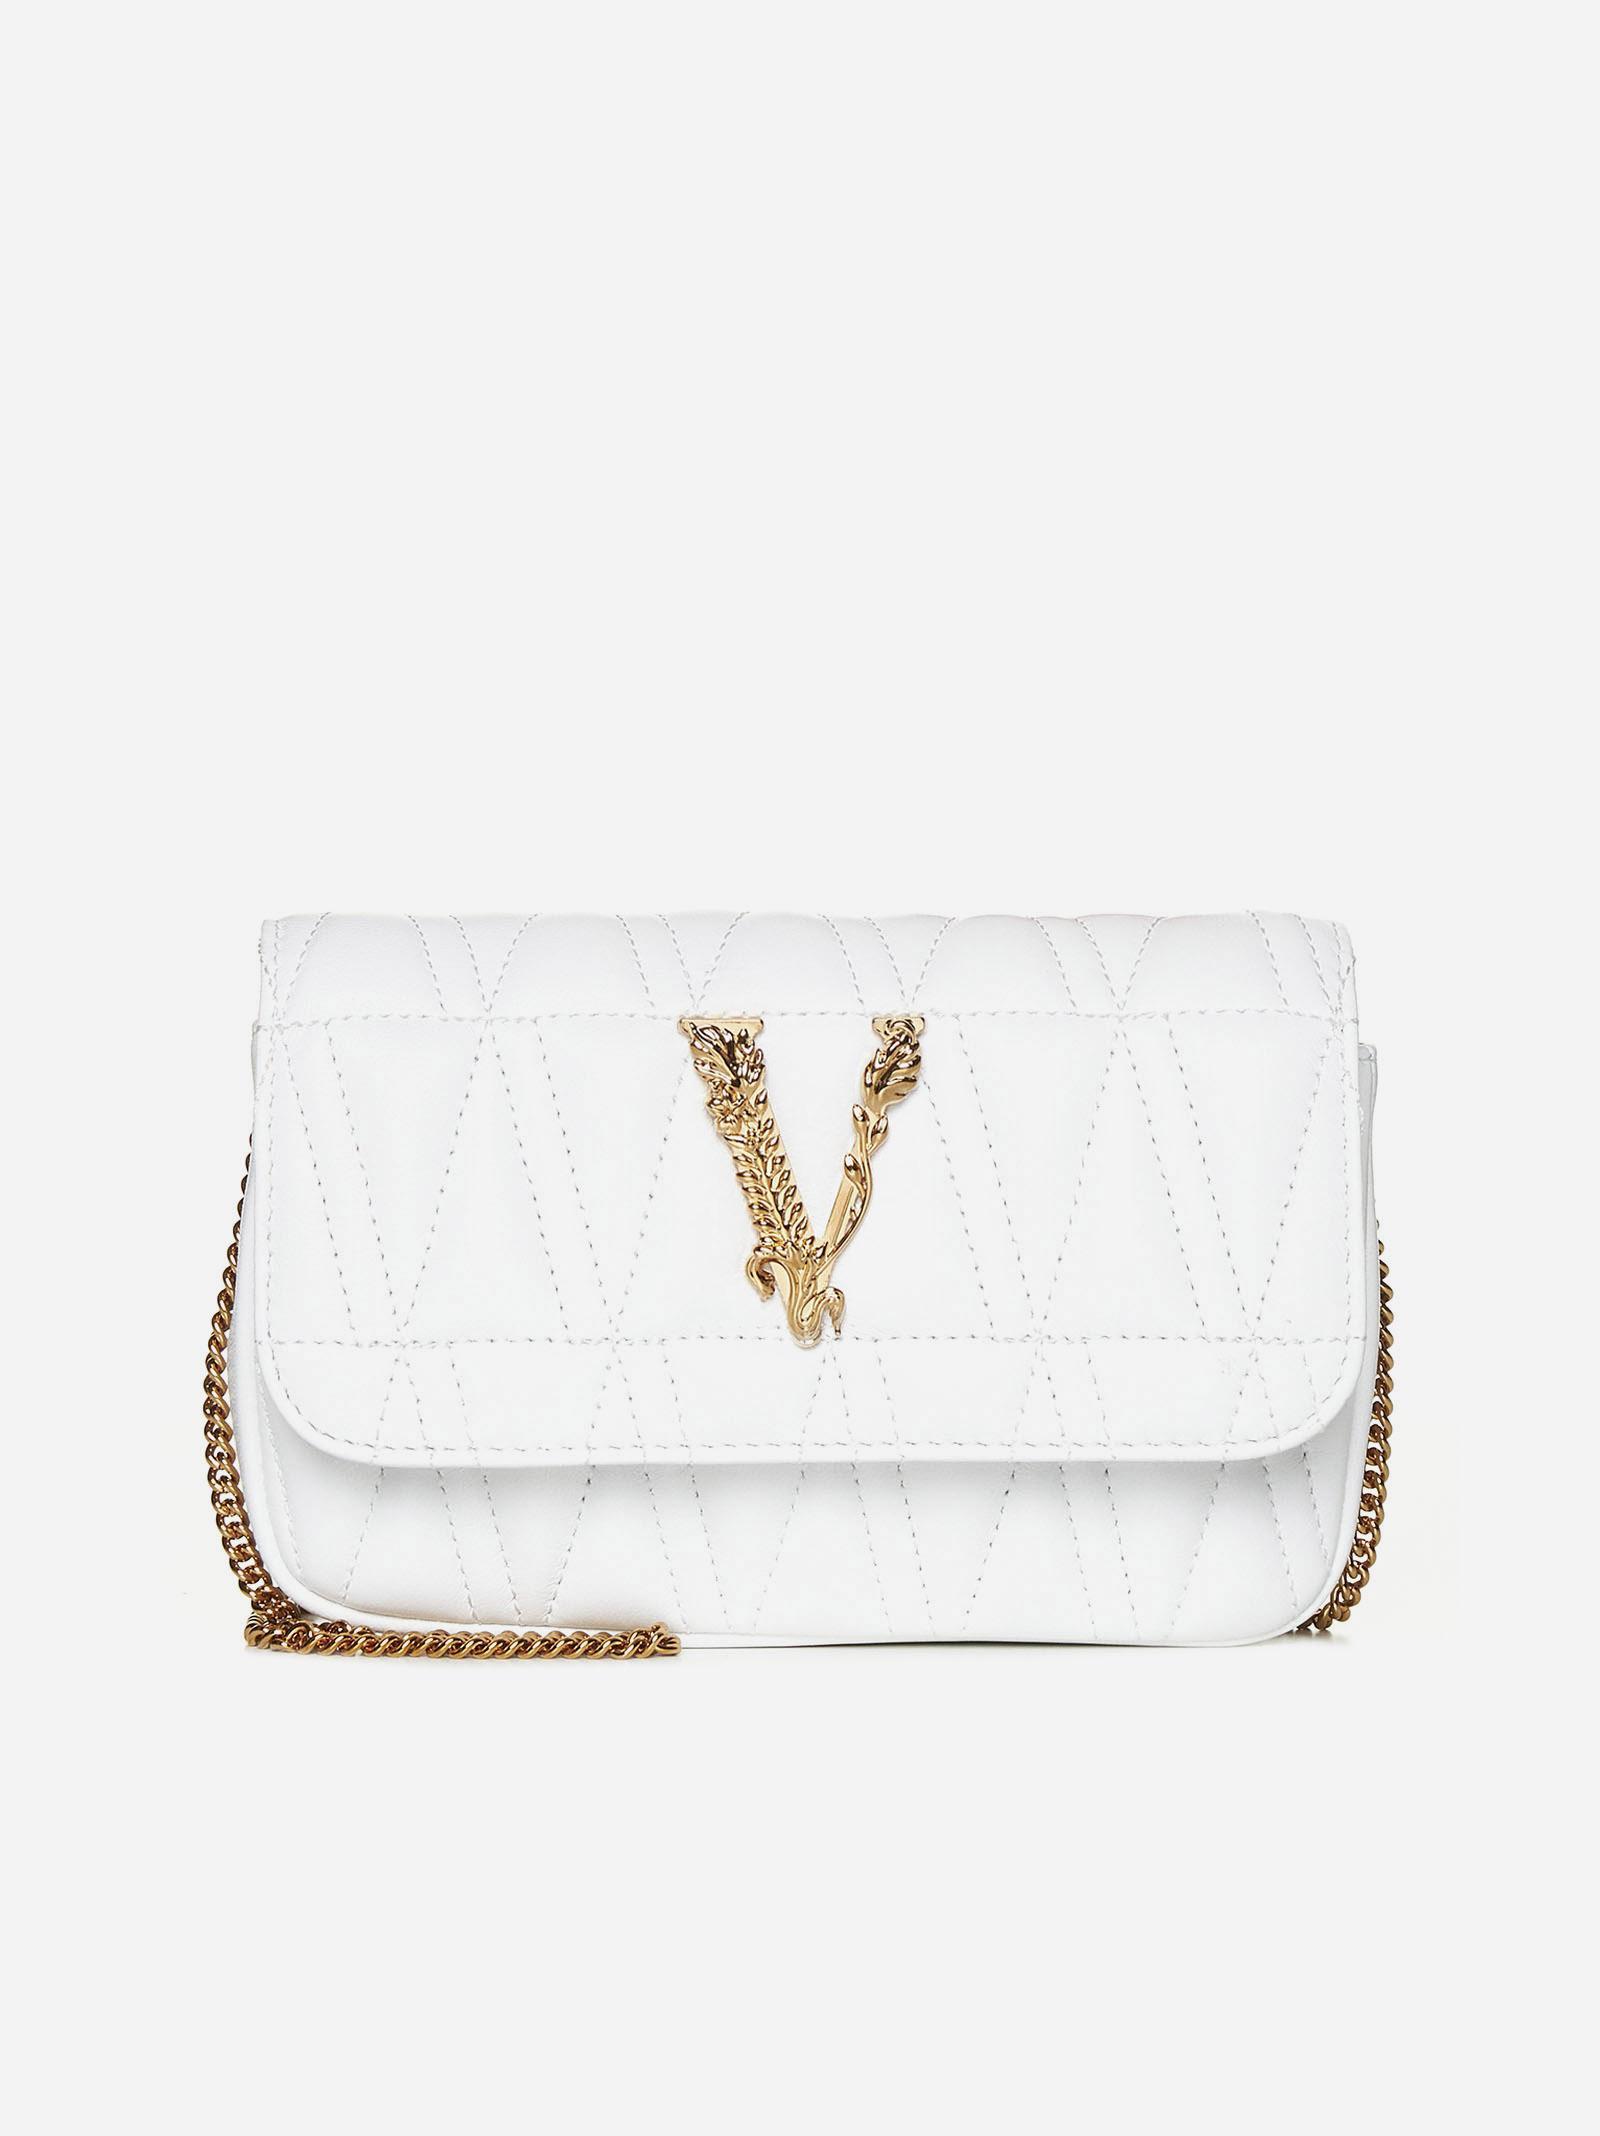 Versace Virtus Quilted Leather Mini Bag in White | Lyst